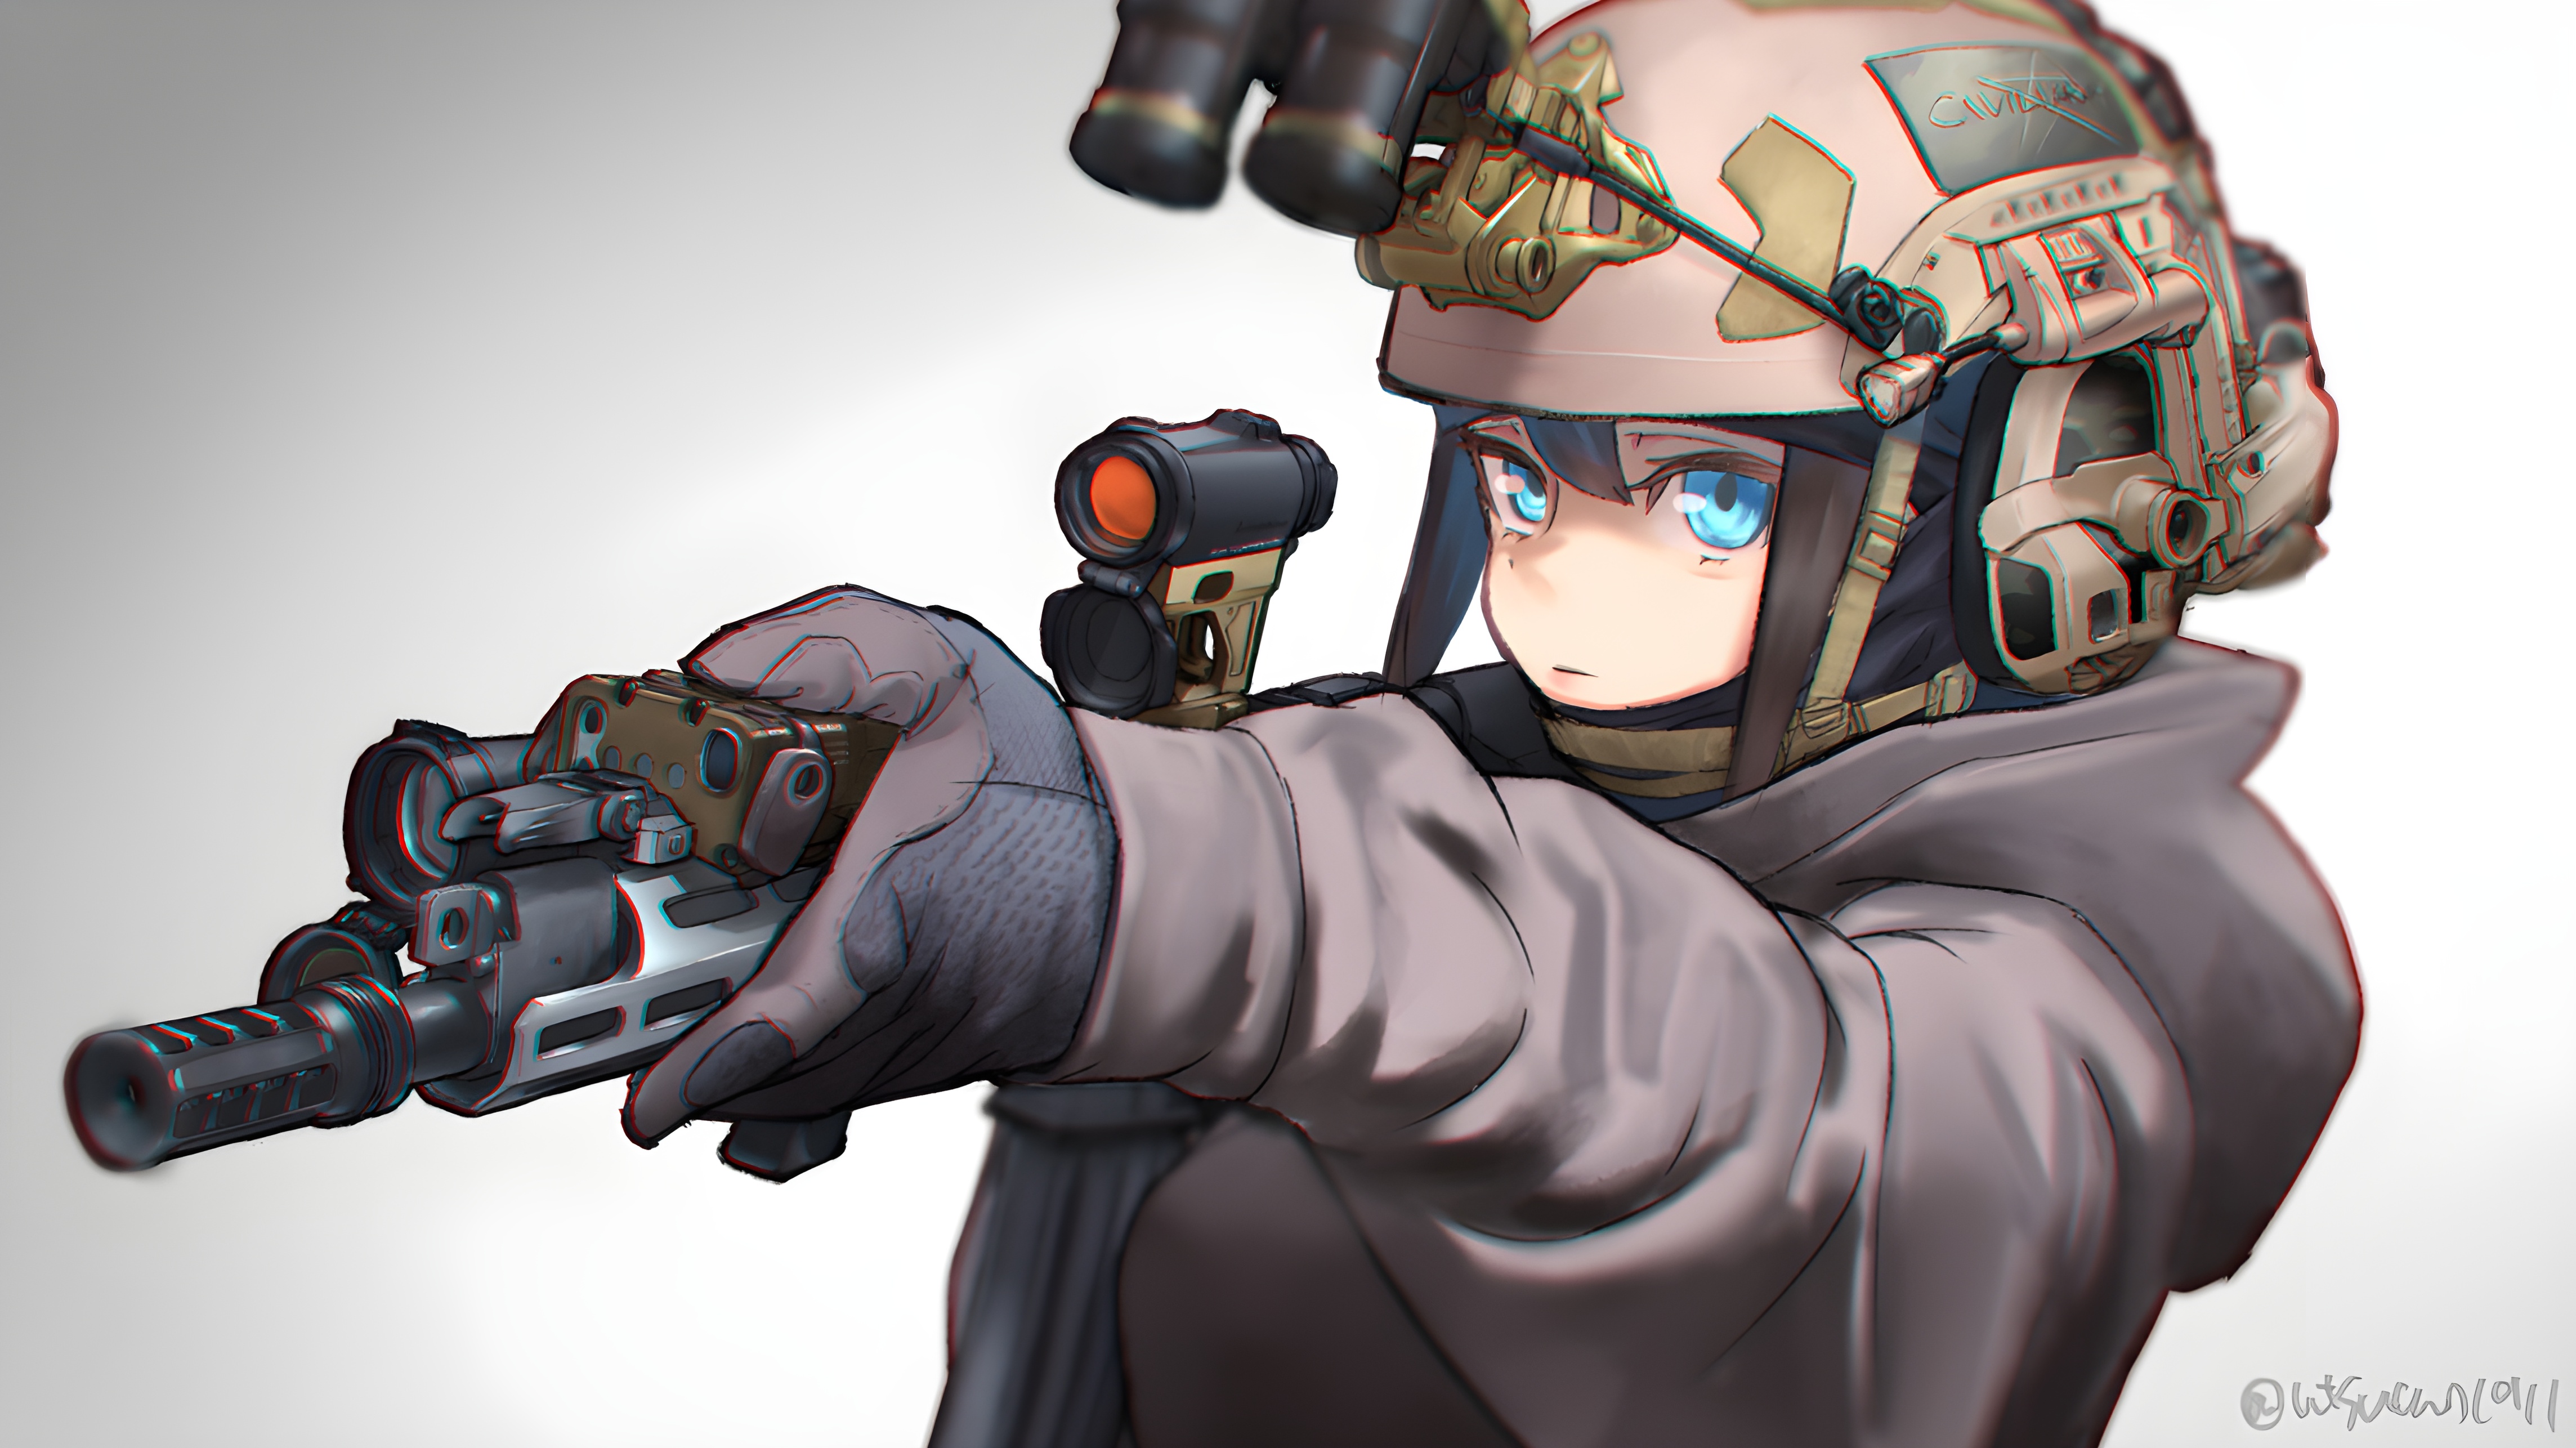 Anime 4576x2572 Ops-core tactical girls with guns anime girls gun anime girls with guns